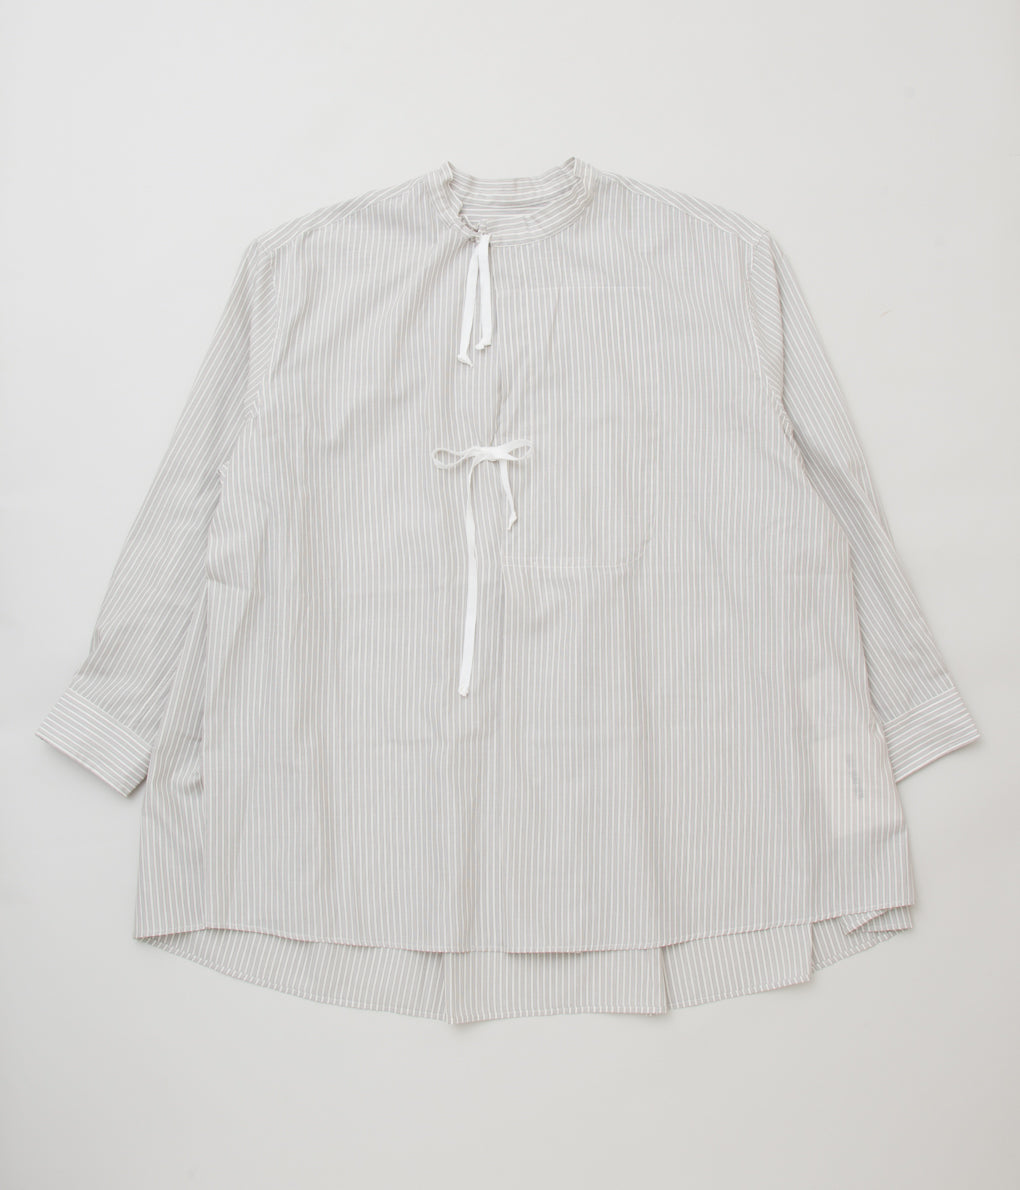 18％OFF】 3 22ss mayner hed PLEAT LINEN SHIRT シャツ - vominfo.com